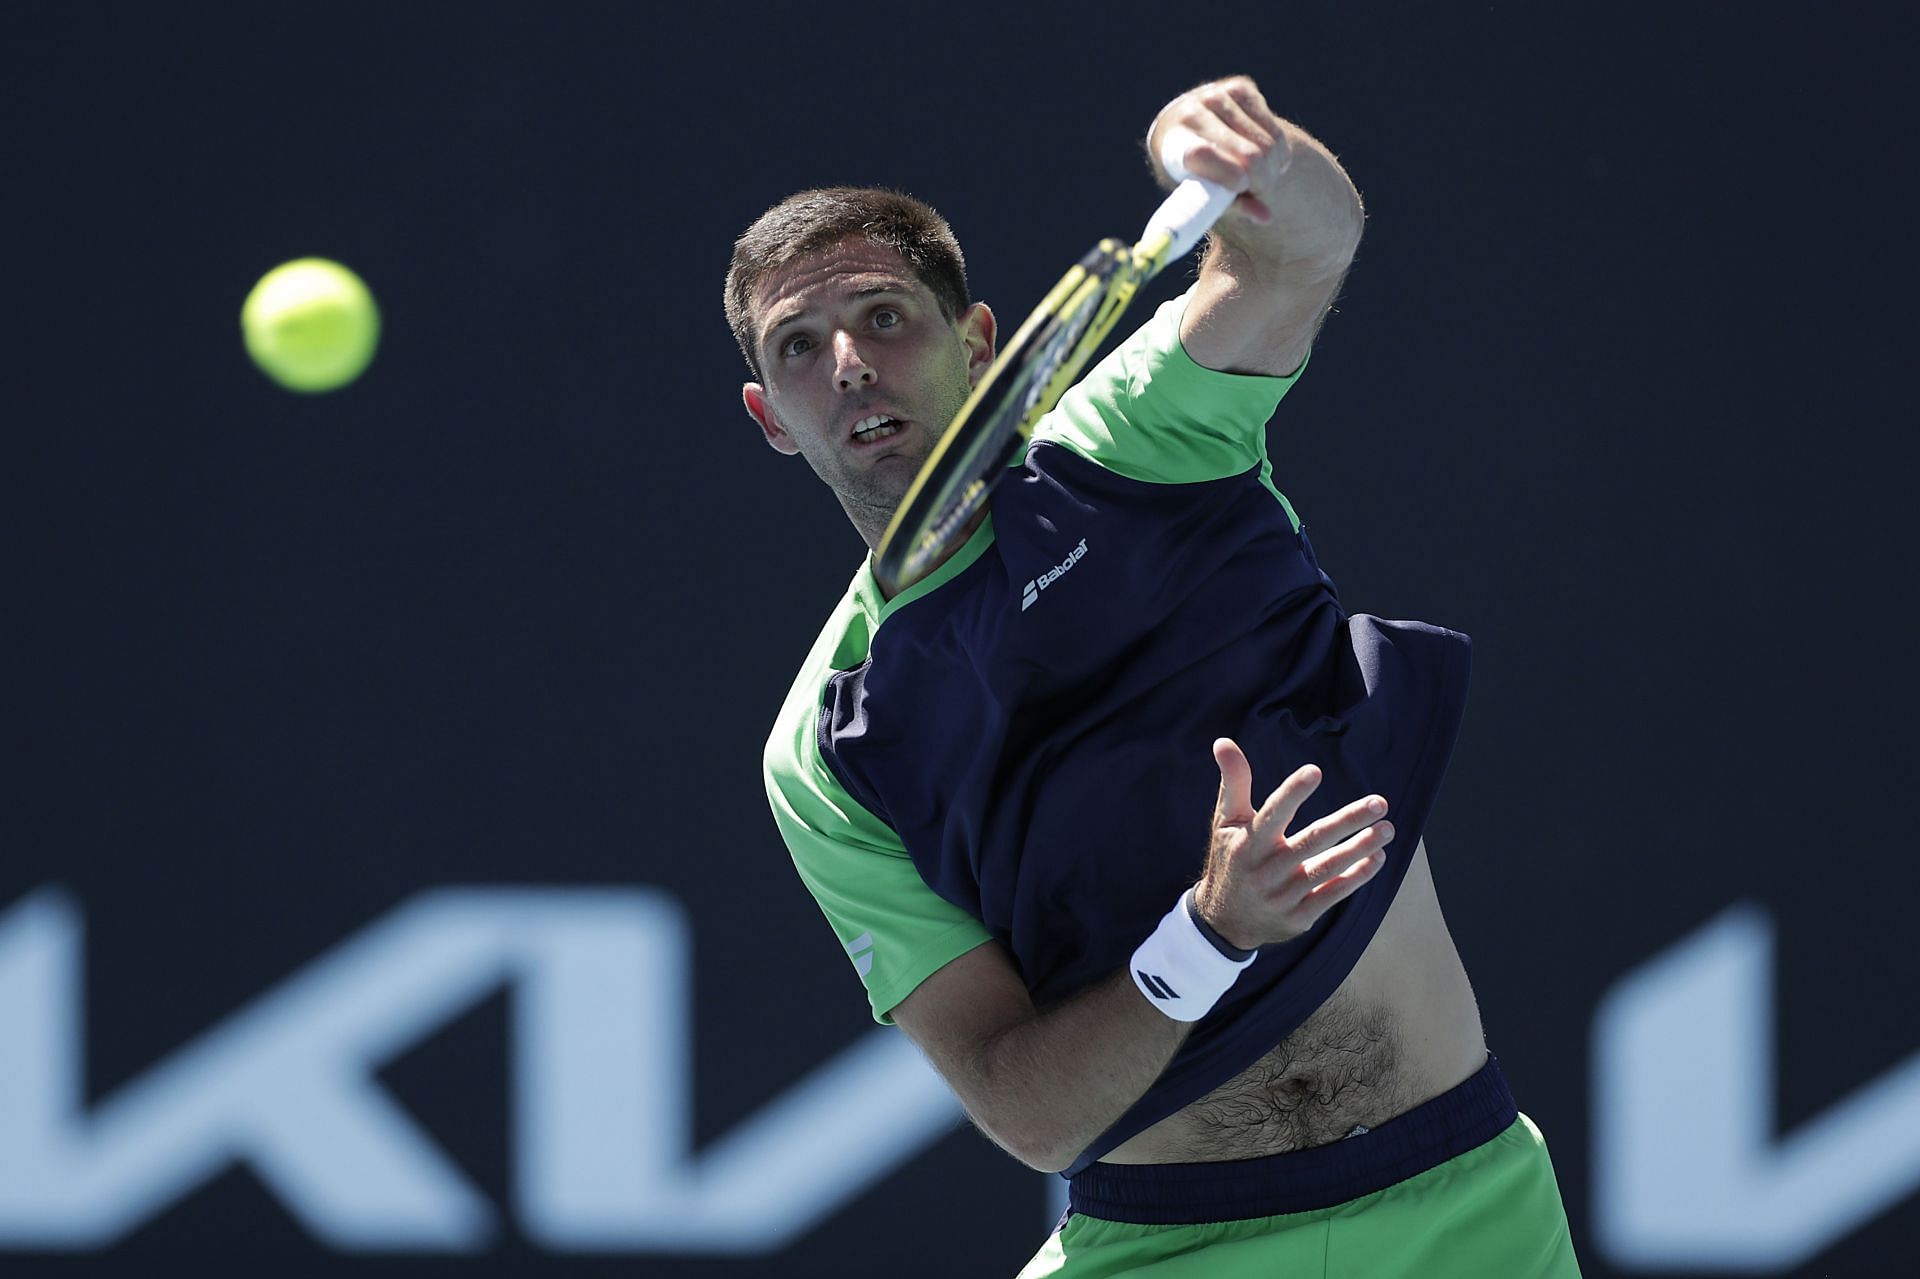 Federico Delbonis reached the second round of the Argentina Open by defeating Juan Martin del Potro